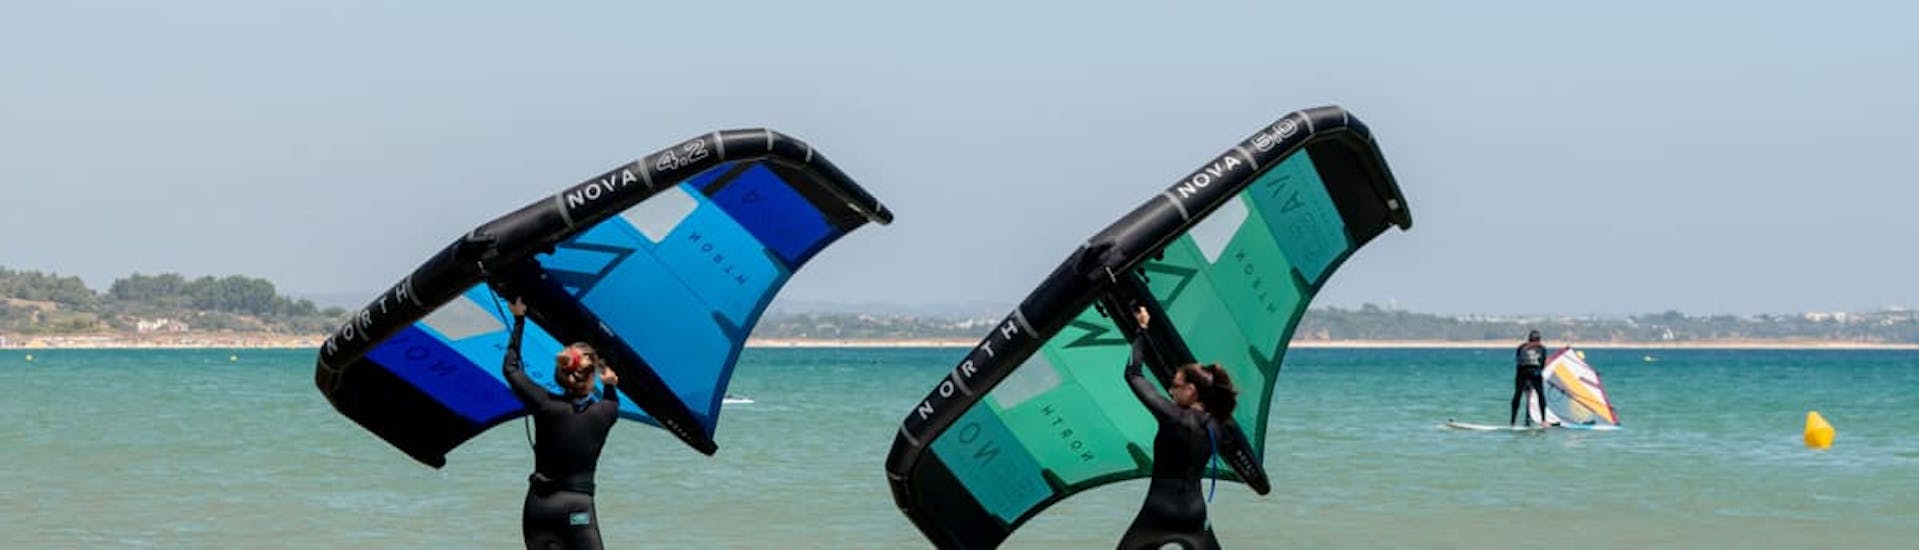 Two people during the wing controlling lessons organized by Algarve Watersports.